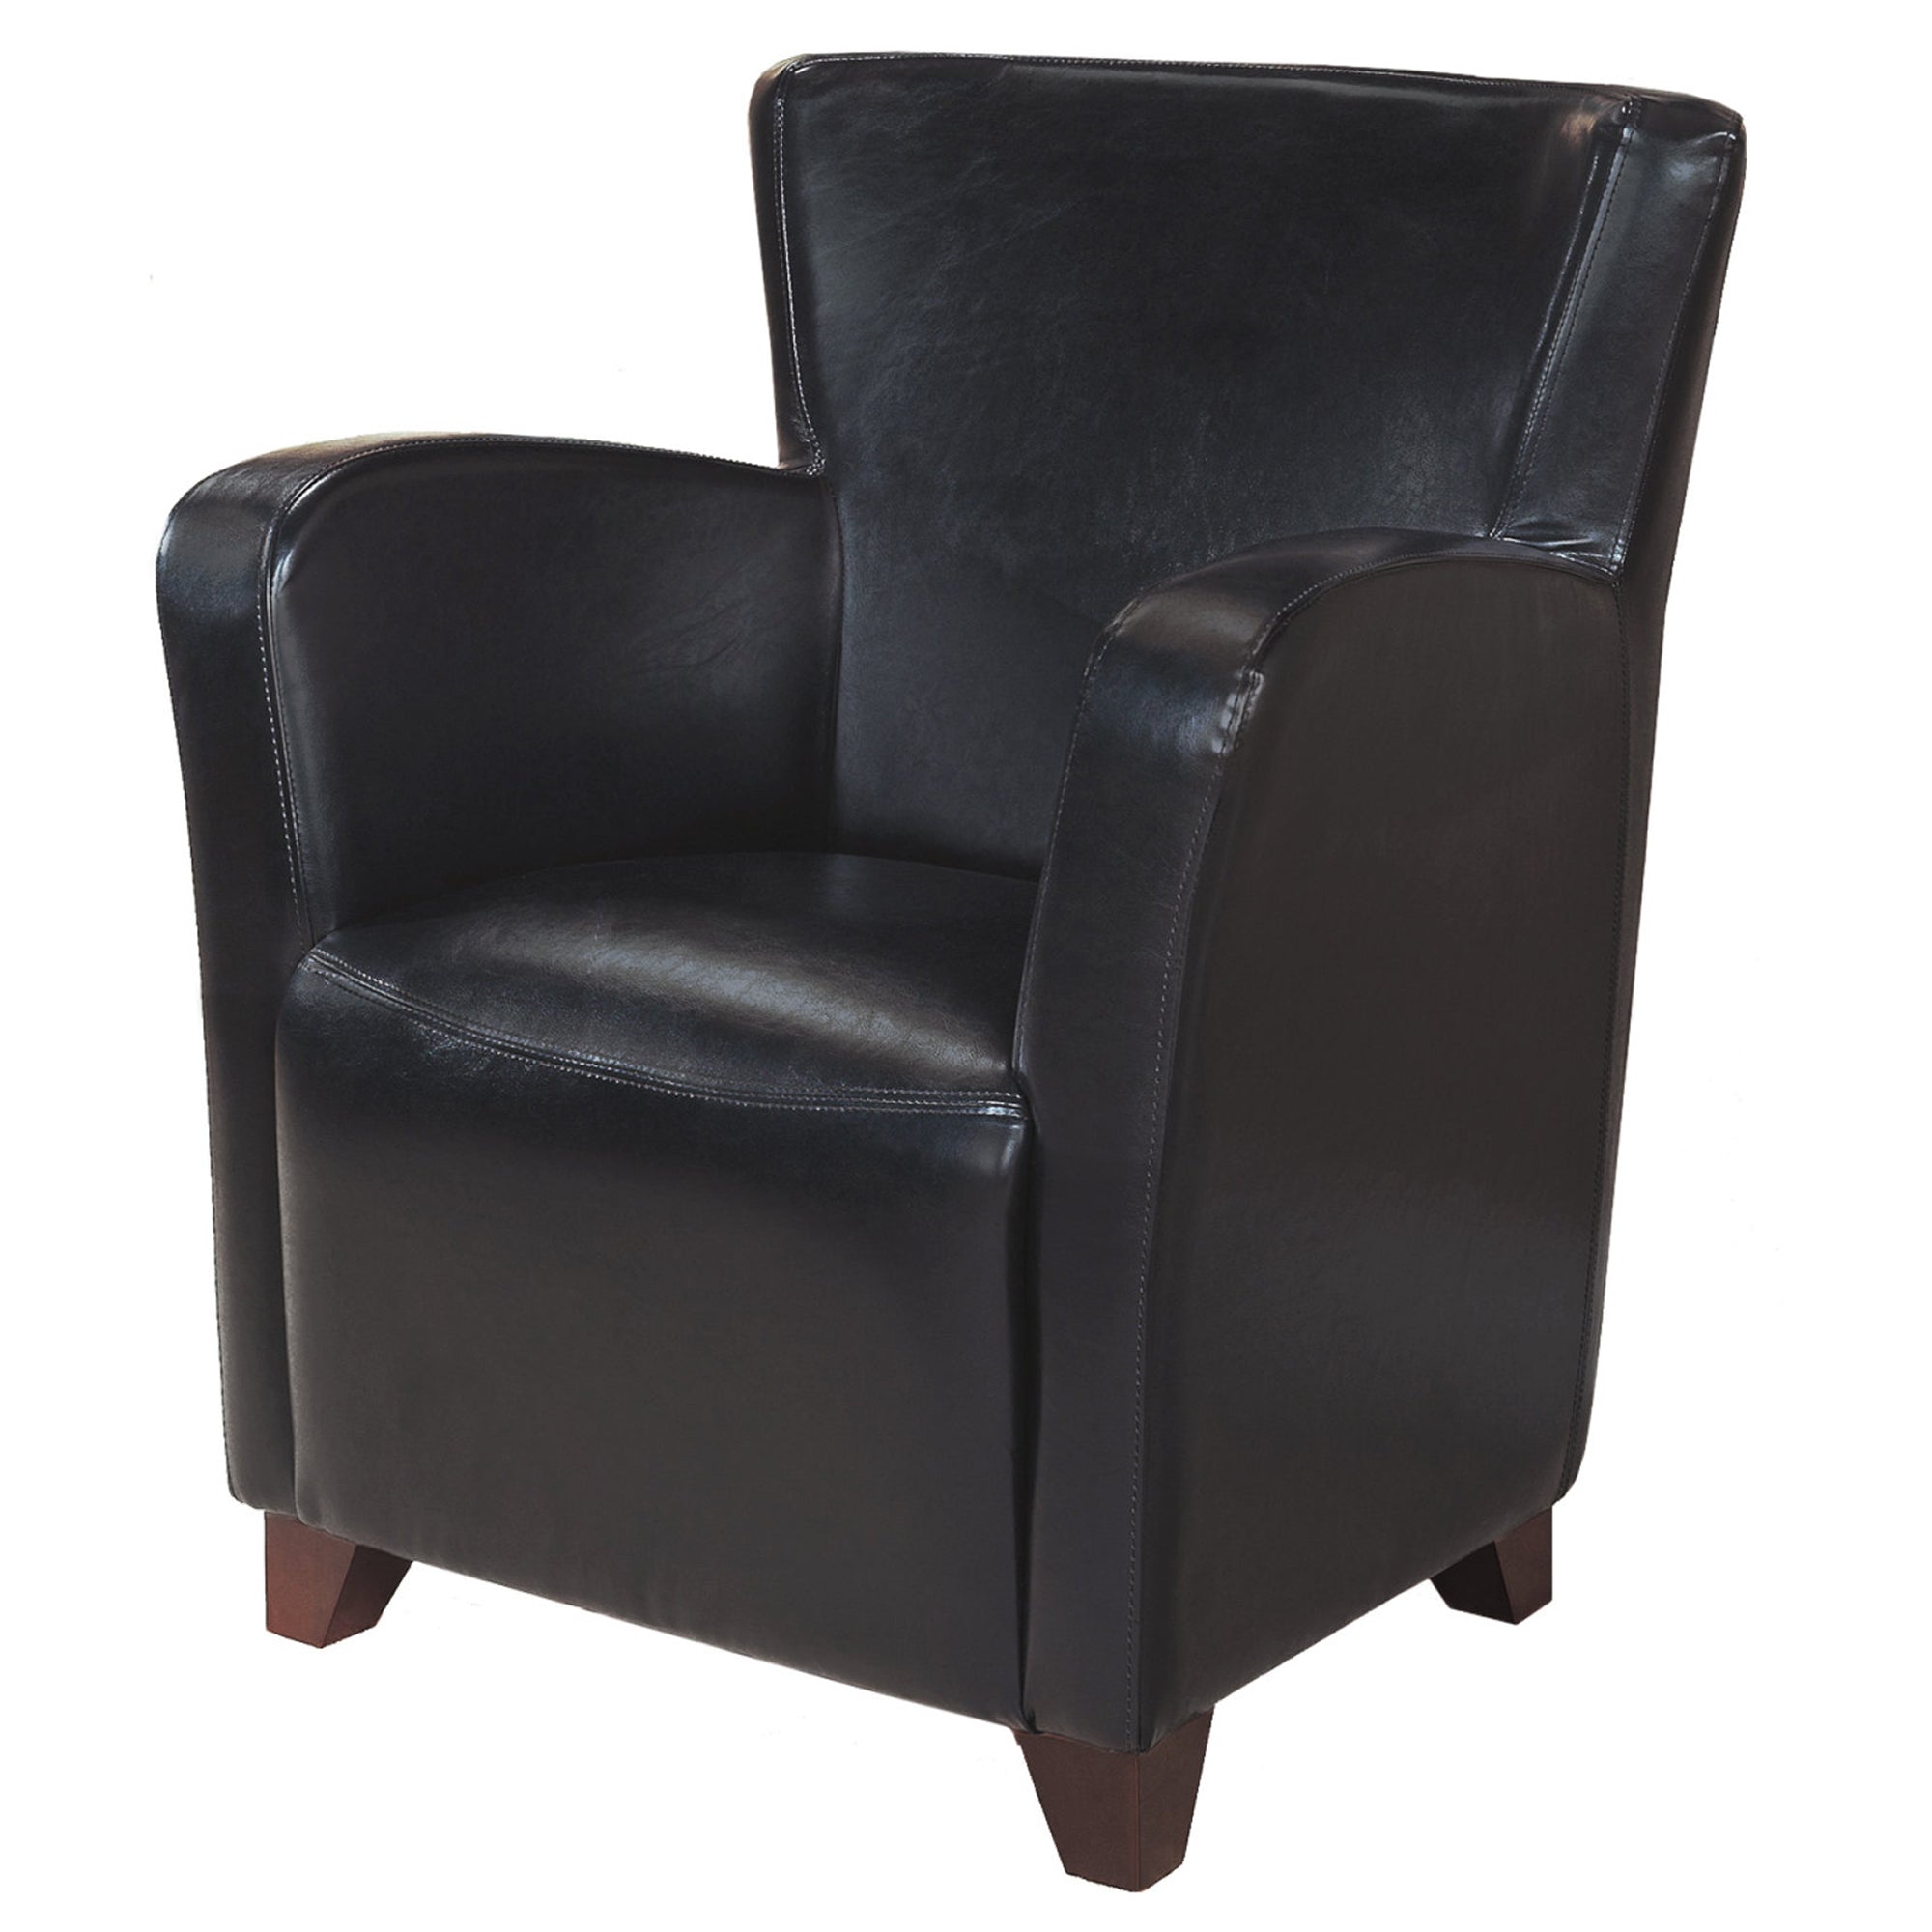 Accent Chair - Black Leather-Look Fabric